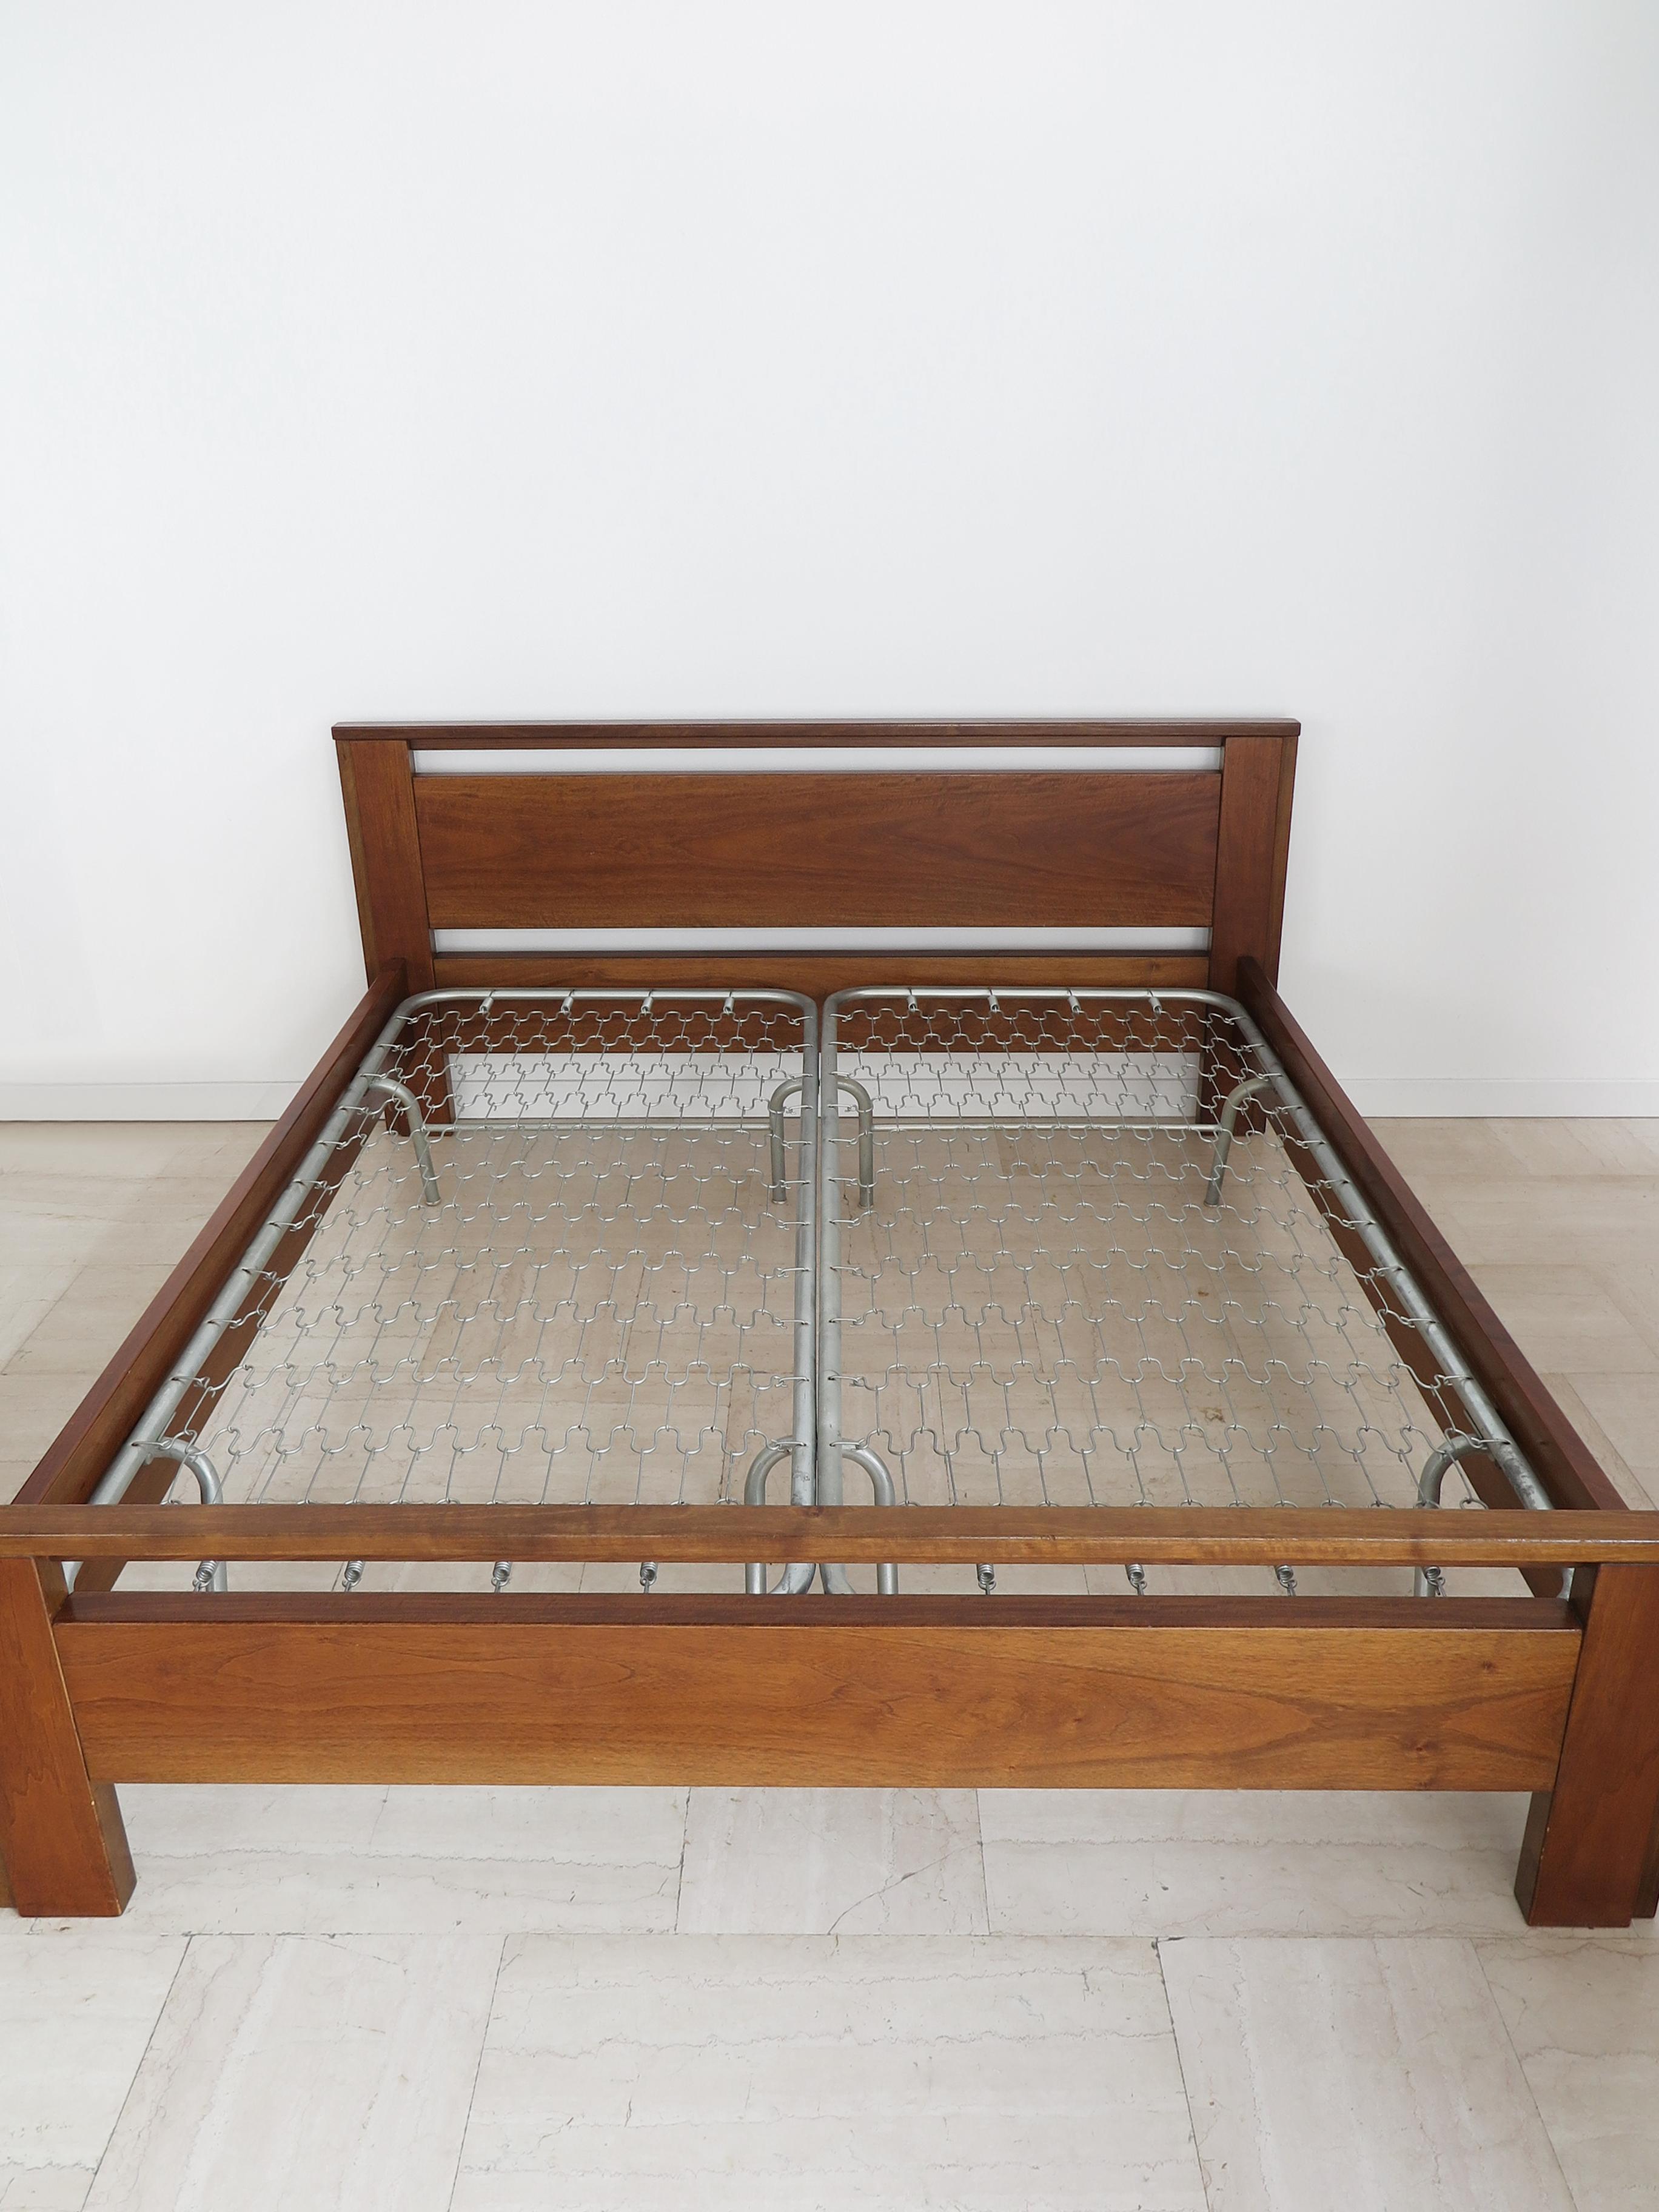 Italian midcentury modern design walnut bed serie Serena designed by Giovanni Michelucci and produced by Poltronova including original Ondaflex single bedsprings, Italy 1964.
G. Michelucci trademark embossed.

Single bed dimensions: width 190 cm -